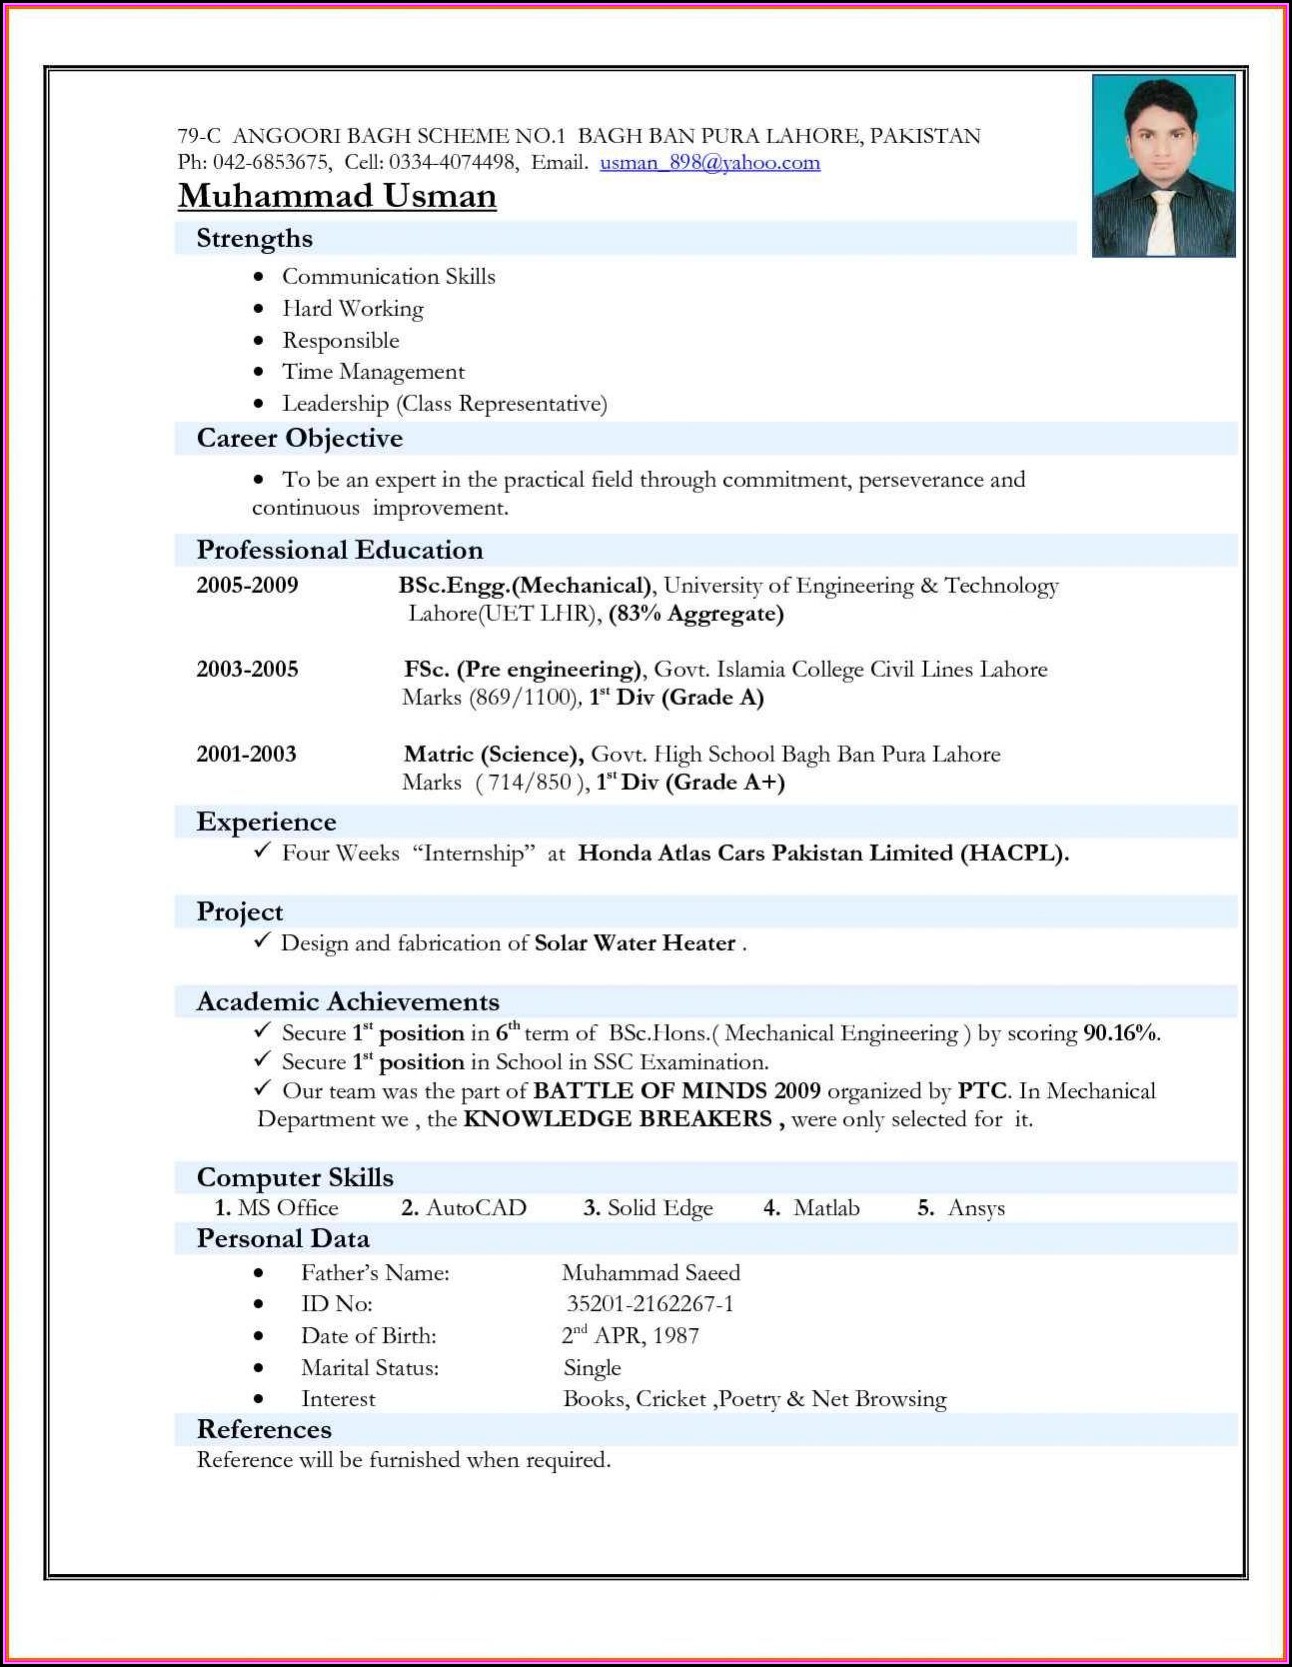 Latest Resume Templates For Freshers Free Download